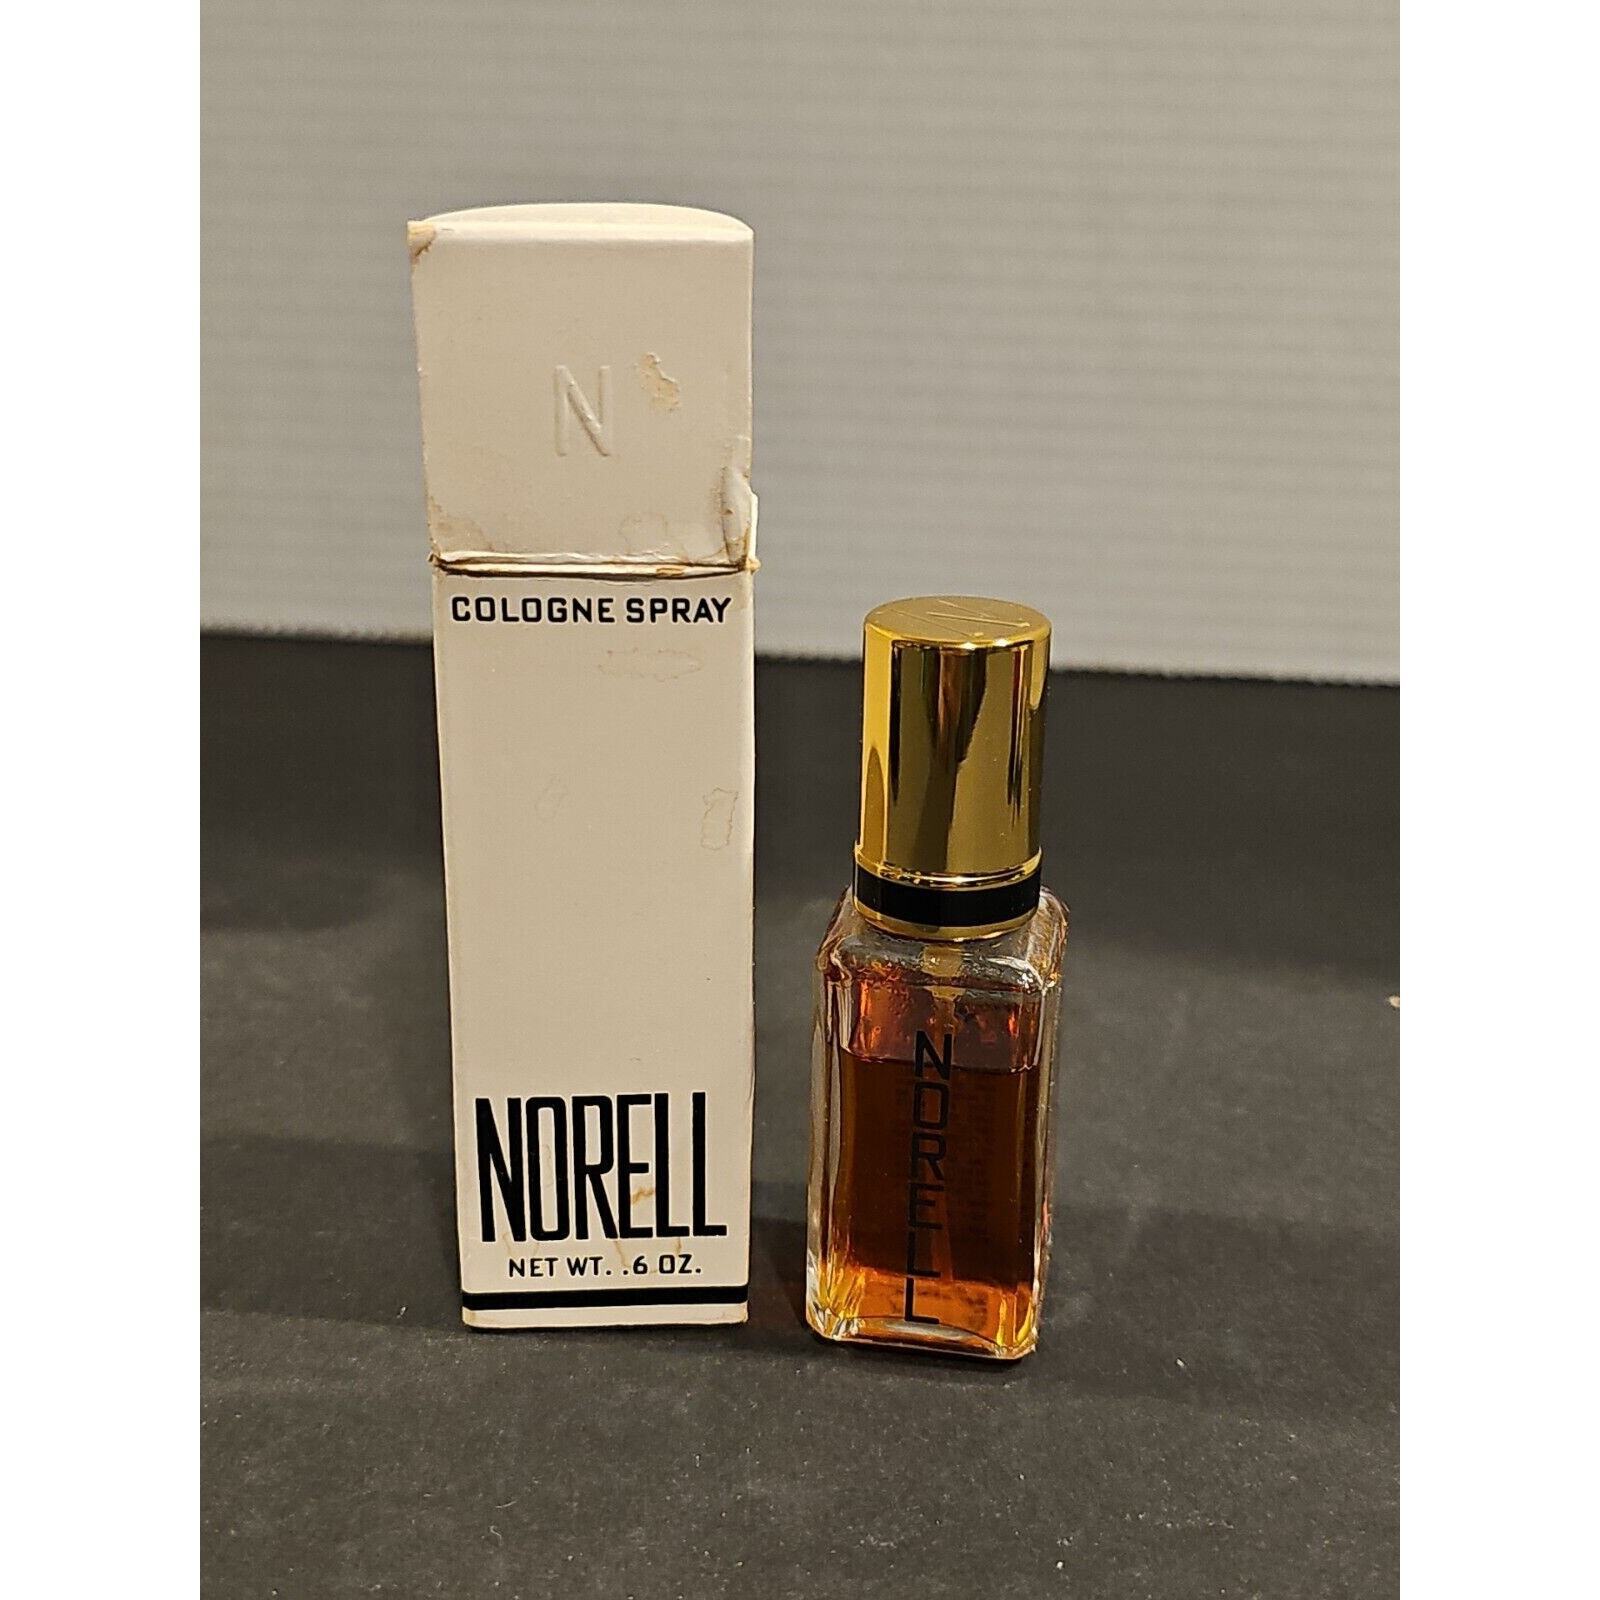 Norell Cologne Spray For Women Pre-Owned in .6oz Bottle Vintage Box Partial 